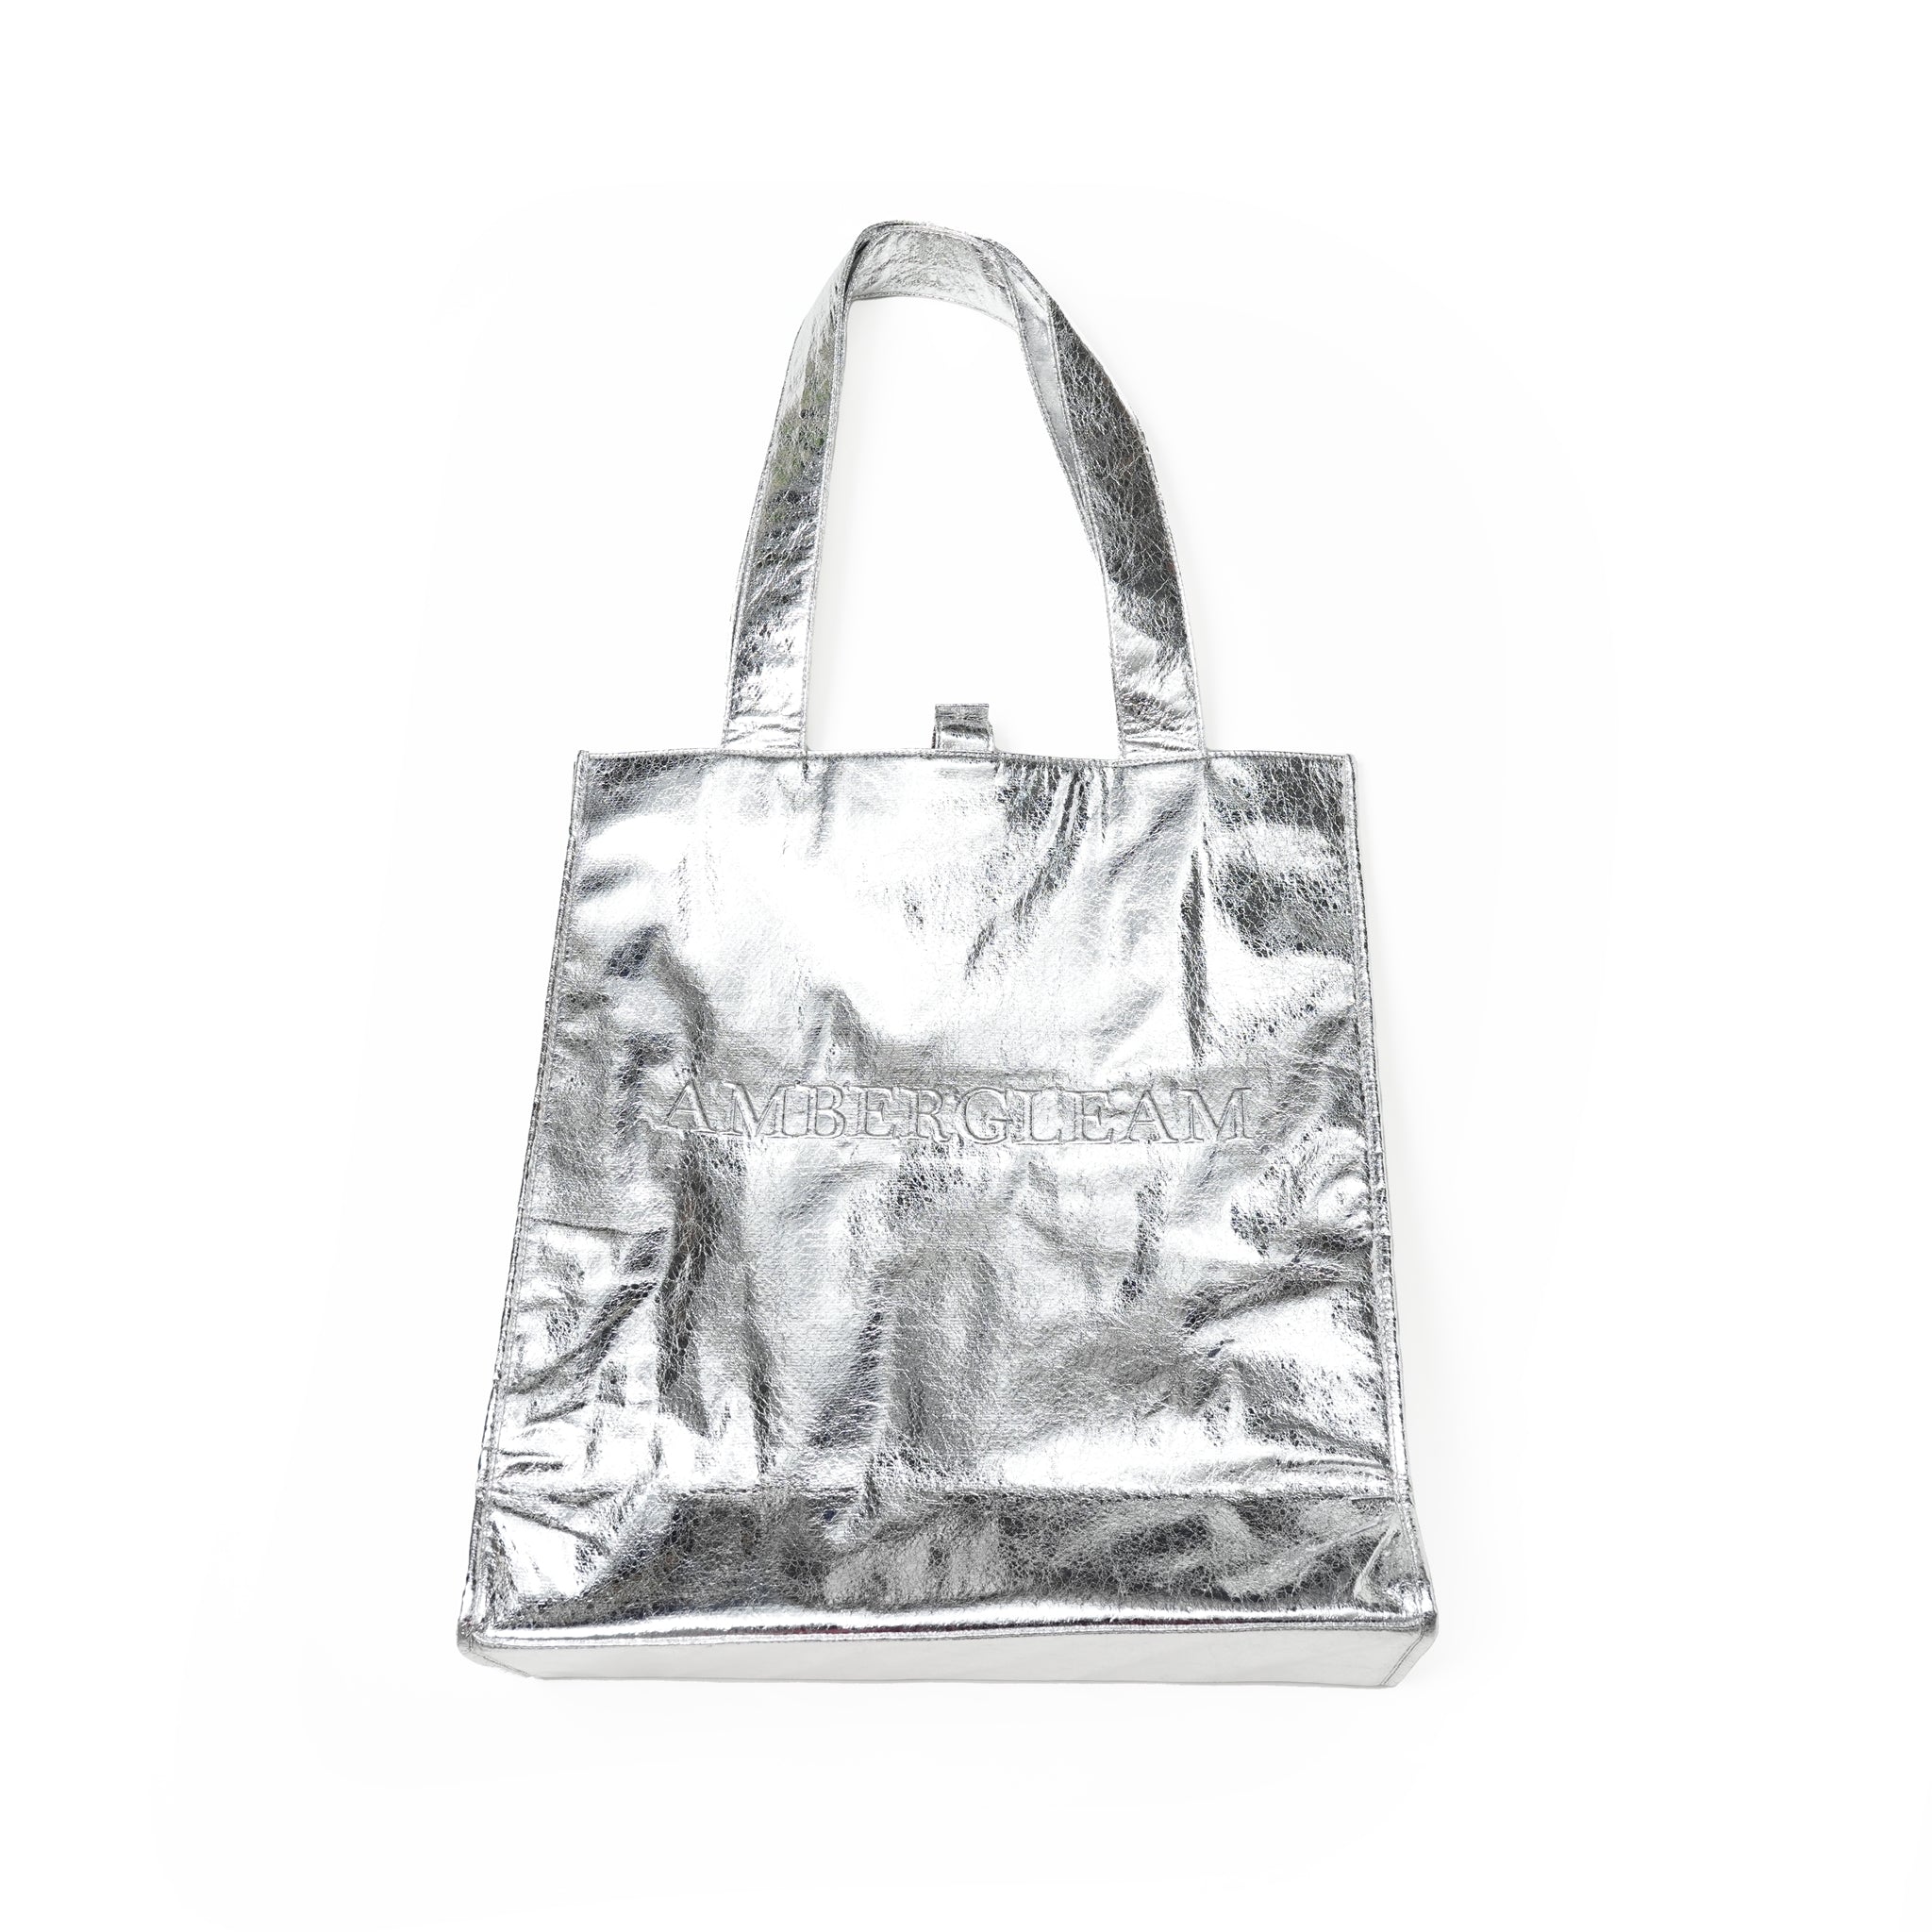 Name:BIG Leather Tote Bag | Color:Silver【AMBERGLEAM_アンバーグリーム】| No:113311116